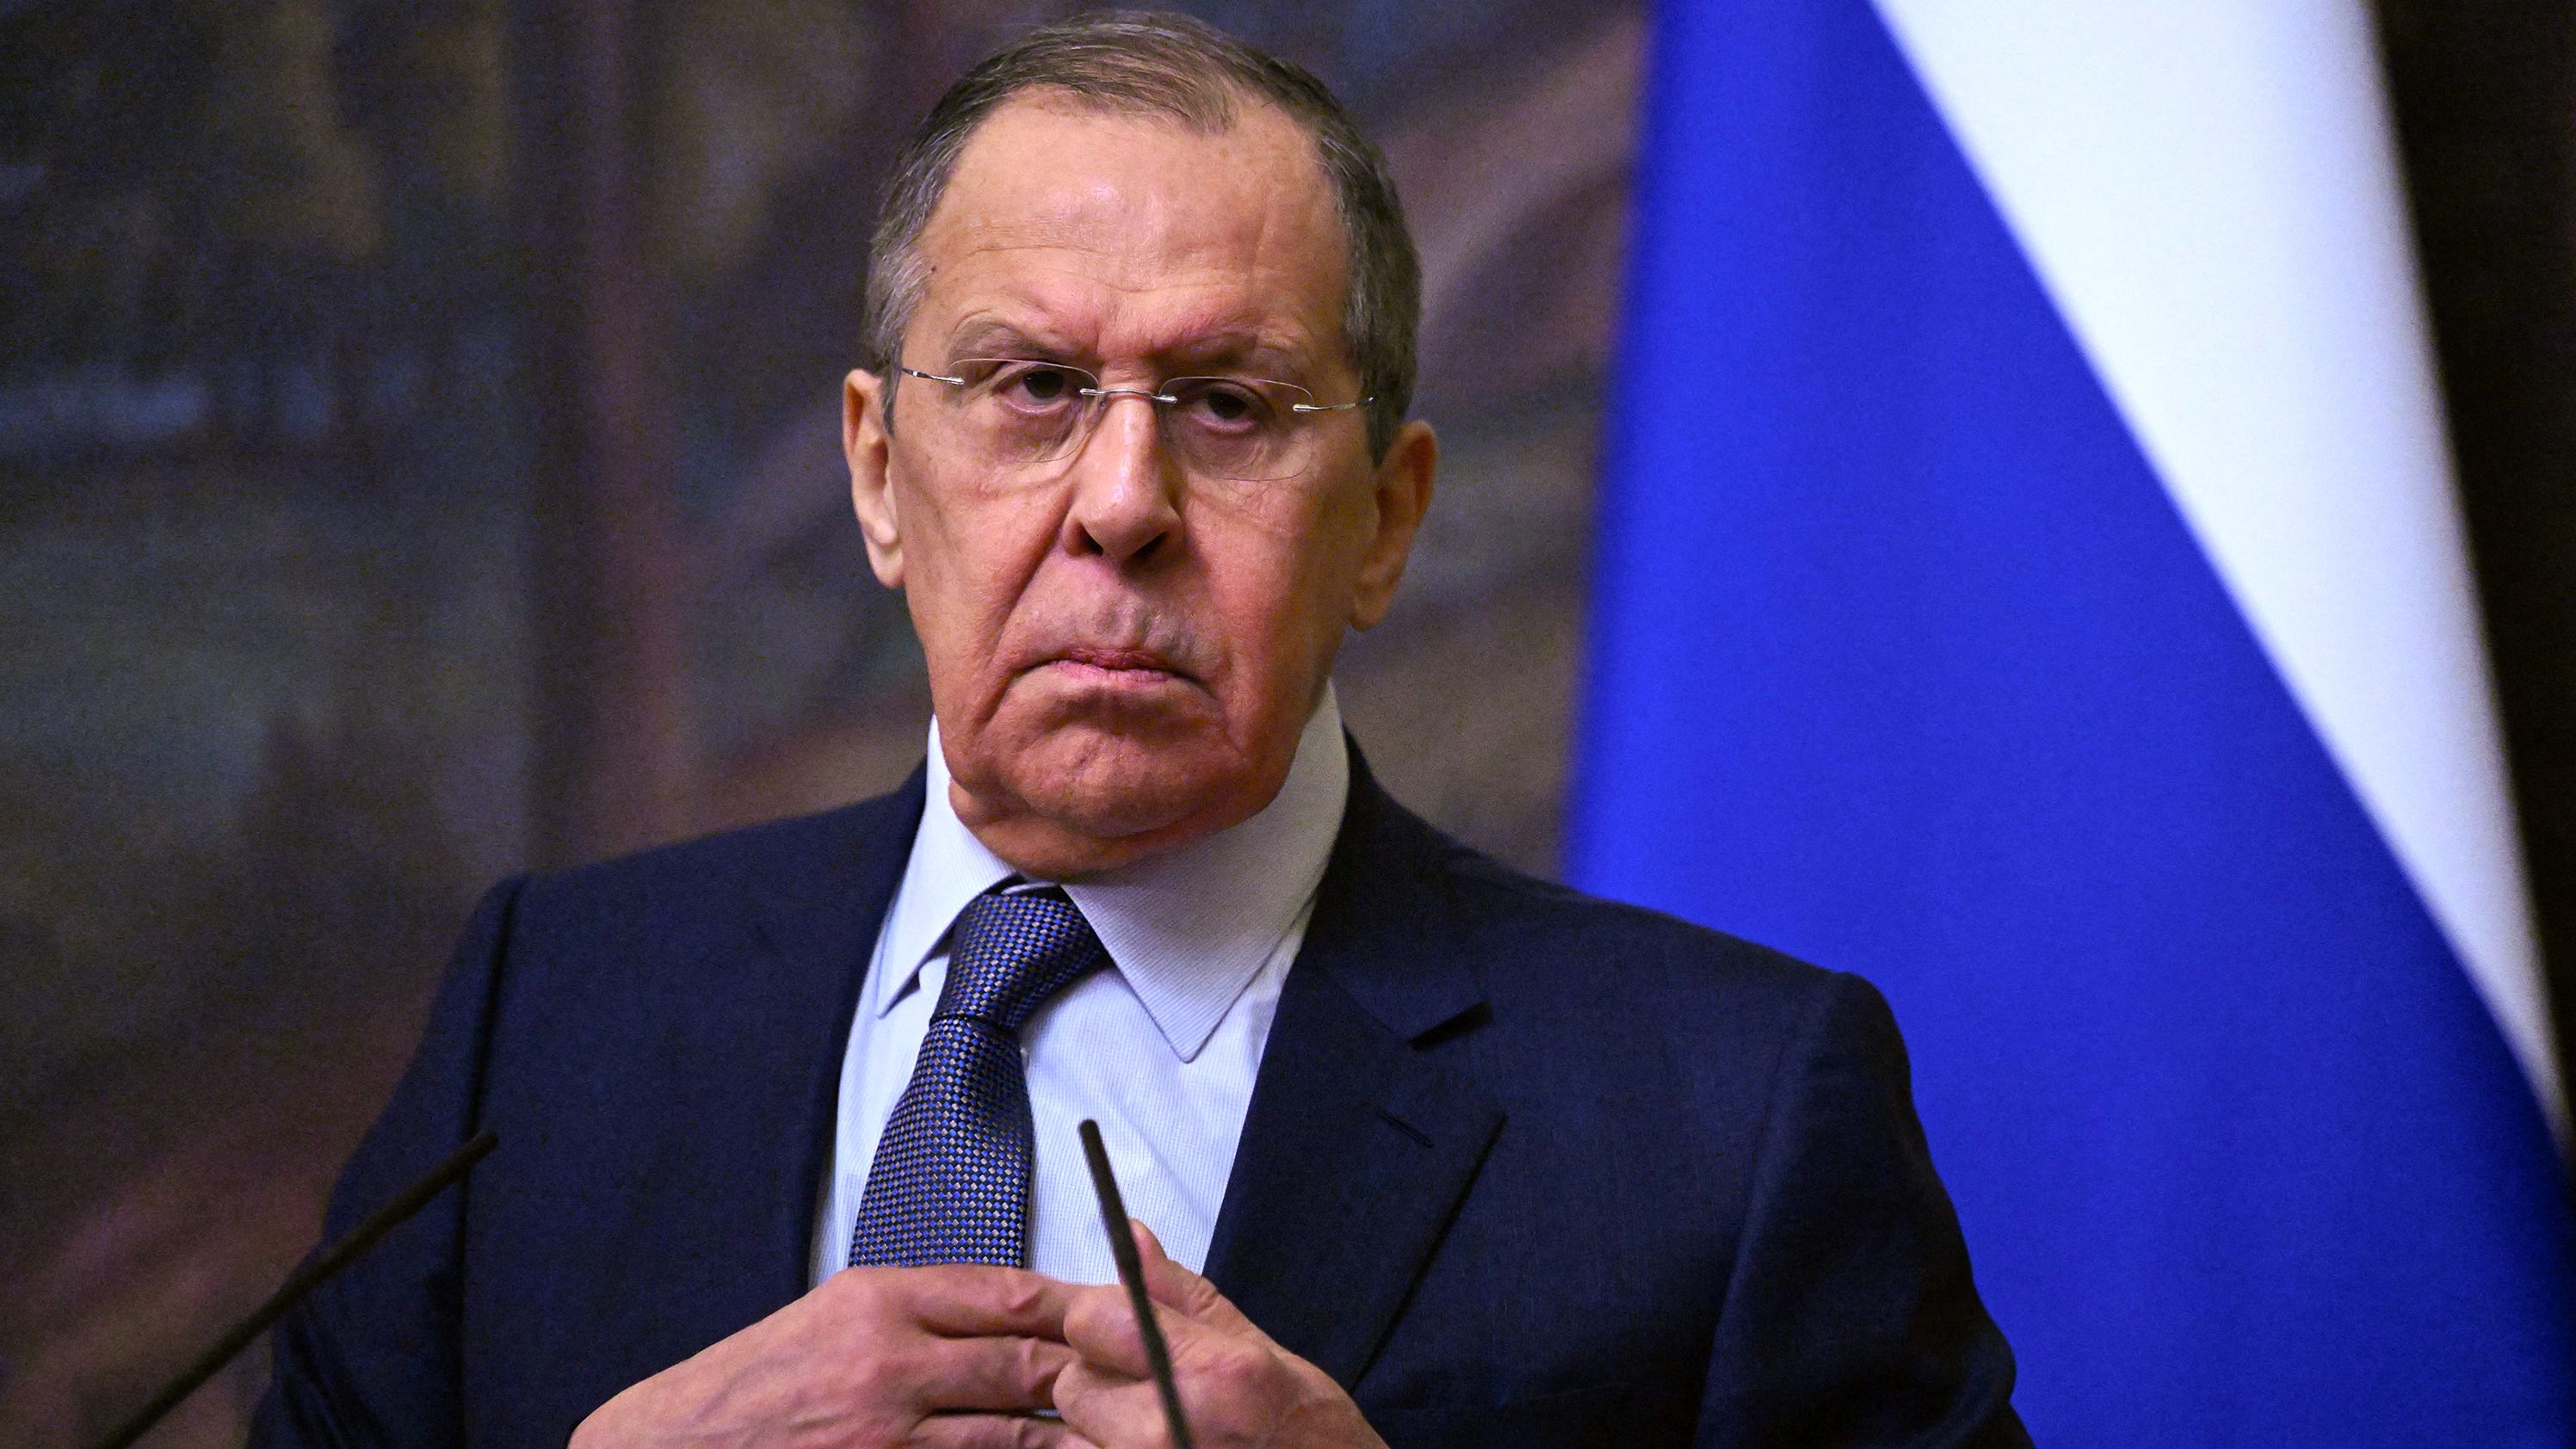 Russian Foreign Minister Sergei Lavrov attends a joint news conference with the International Committee of the Red Cross (ICRC) president following their talks in Moscow on March 24.